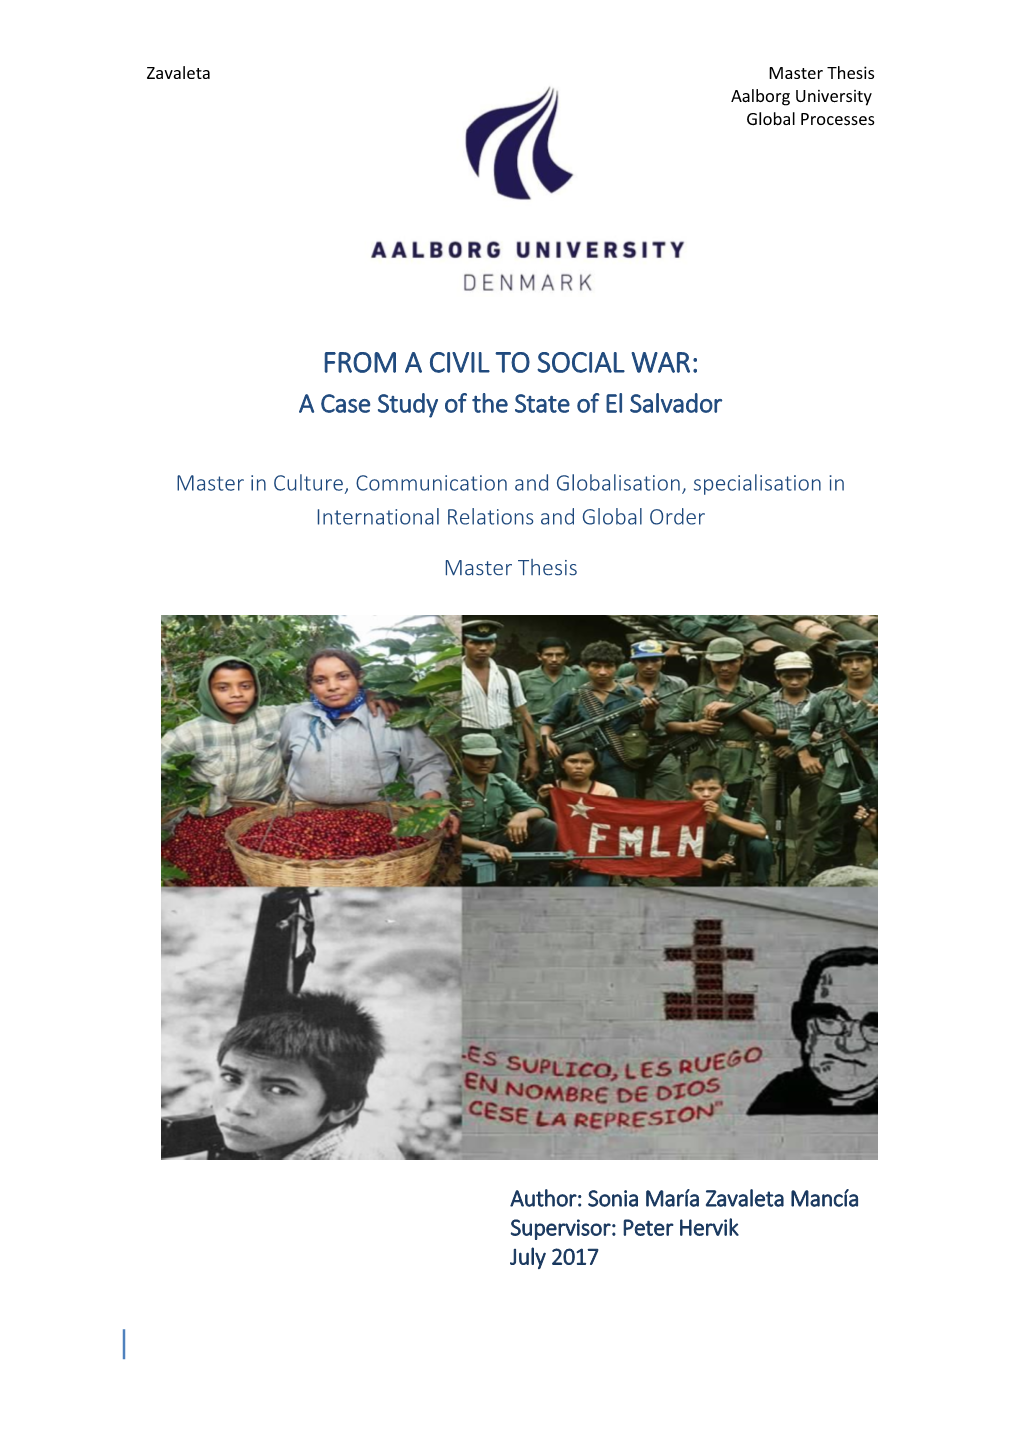 FROM a CIVIL to SOCIAL WAR: a Case Study of the State of El Salvador